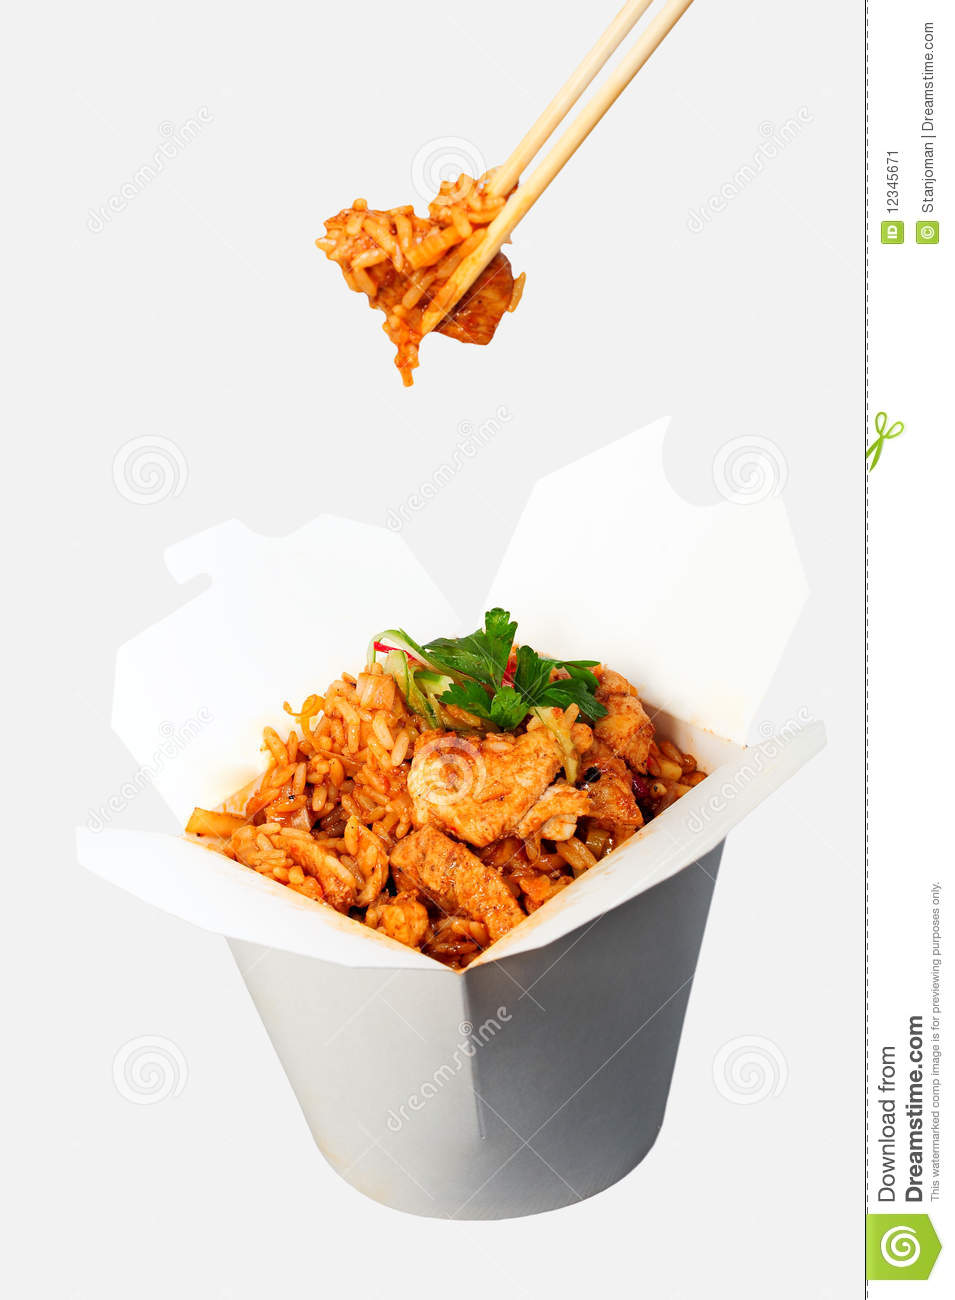 Spicy Chicken Noodles With Fresh Chili And Spring Onion In Take Away